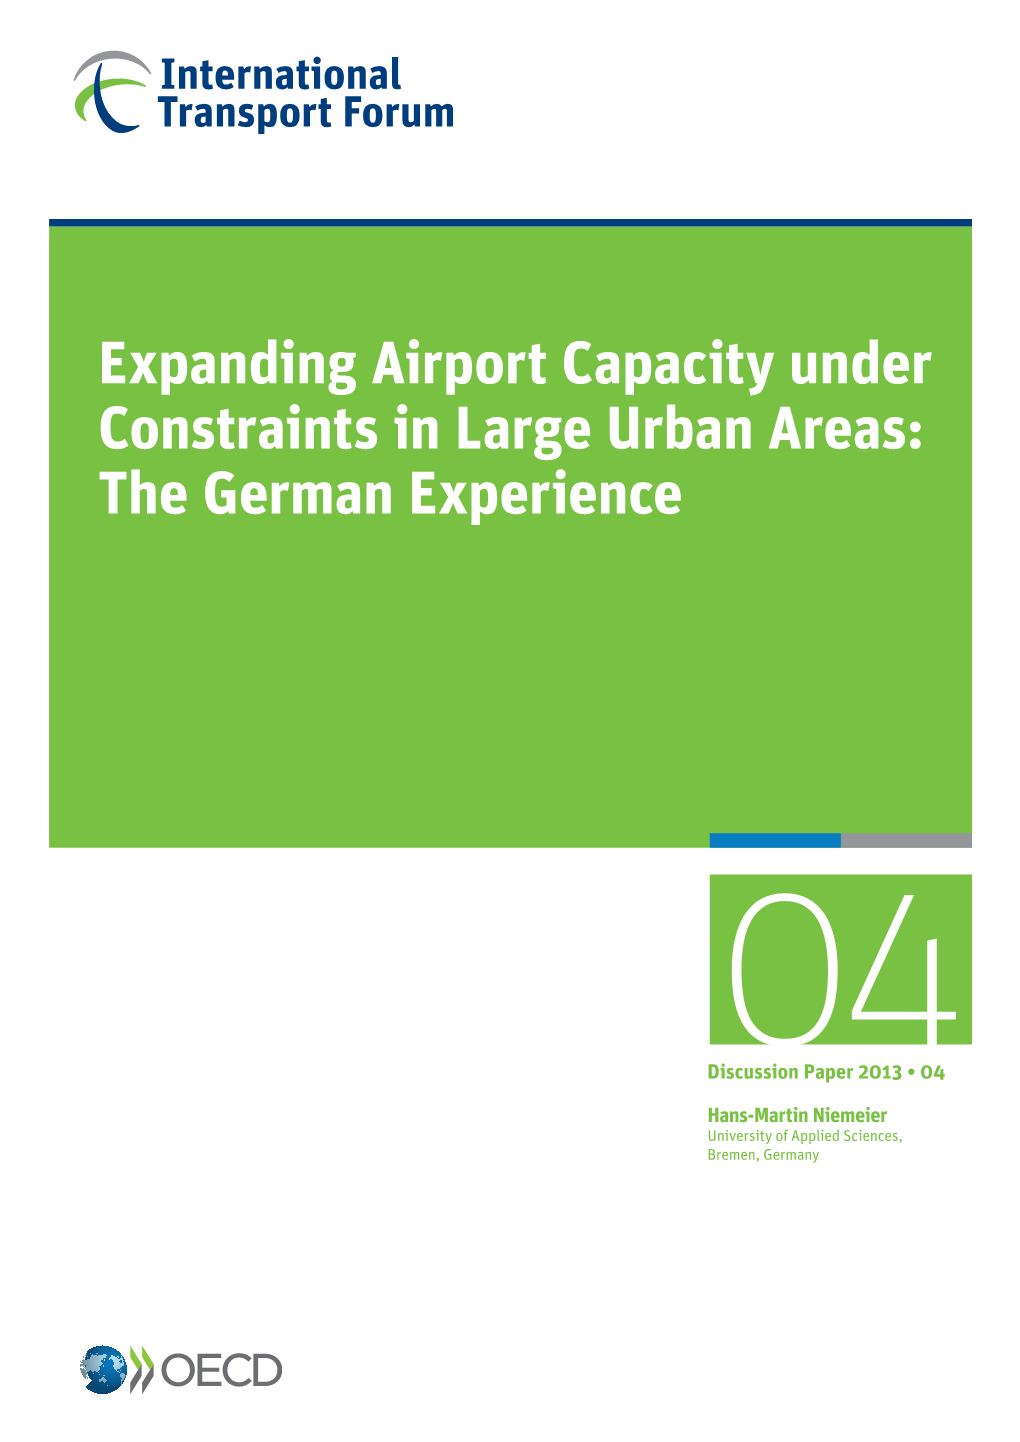 Expanding Airport Capacity Under Constraints in Large Urban Areas: the German Experience